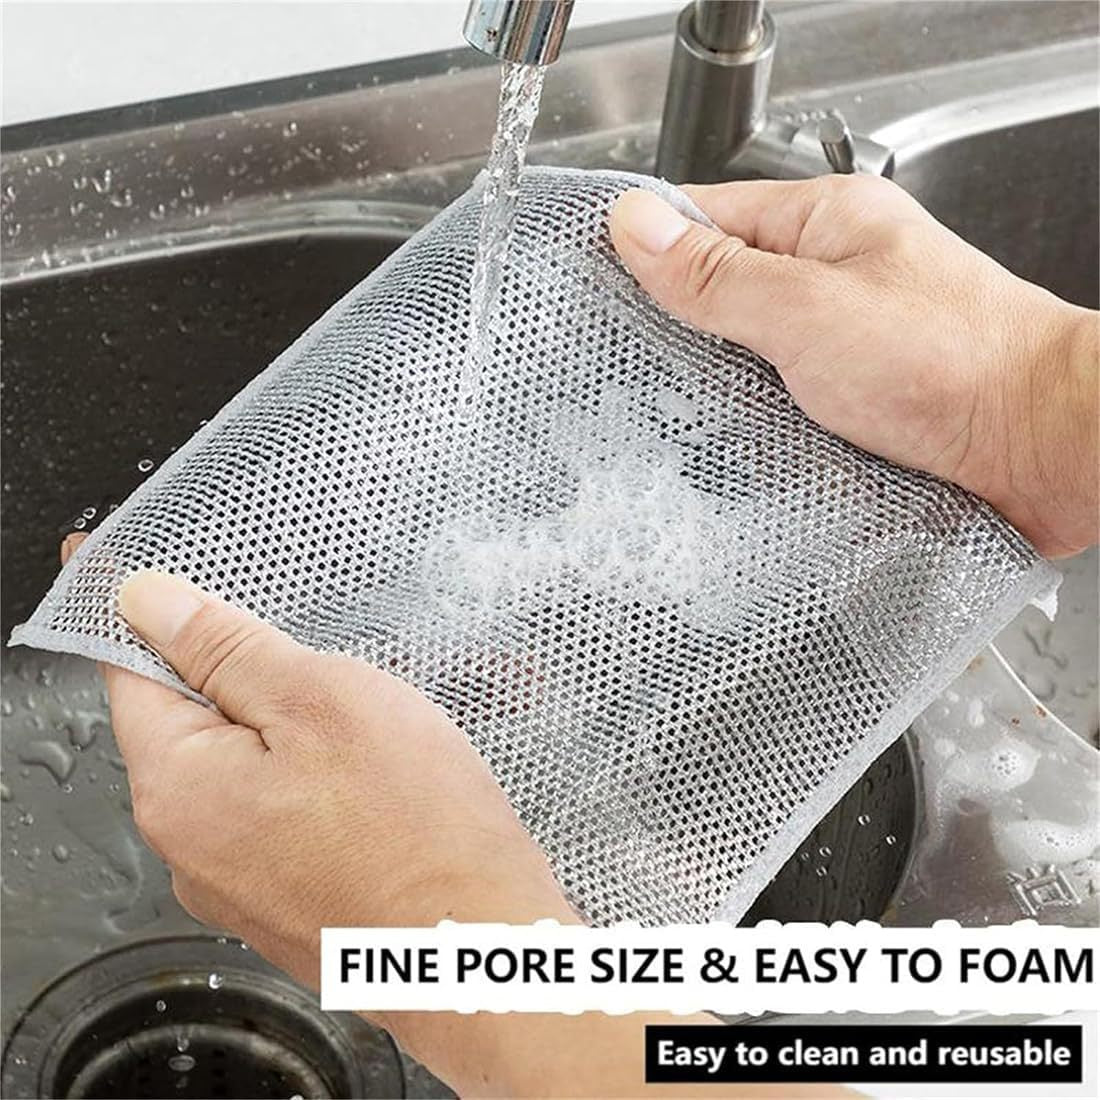 Multifunctional Non-Scratch Wire Dishcloth Kitchen Cleaning Set